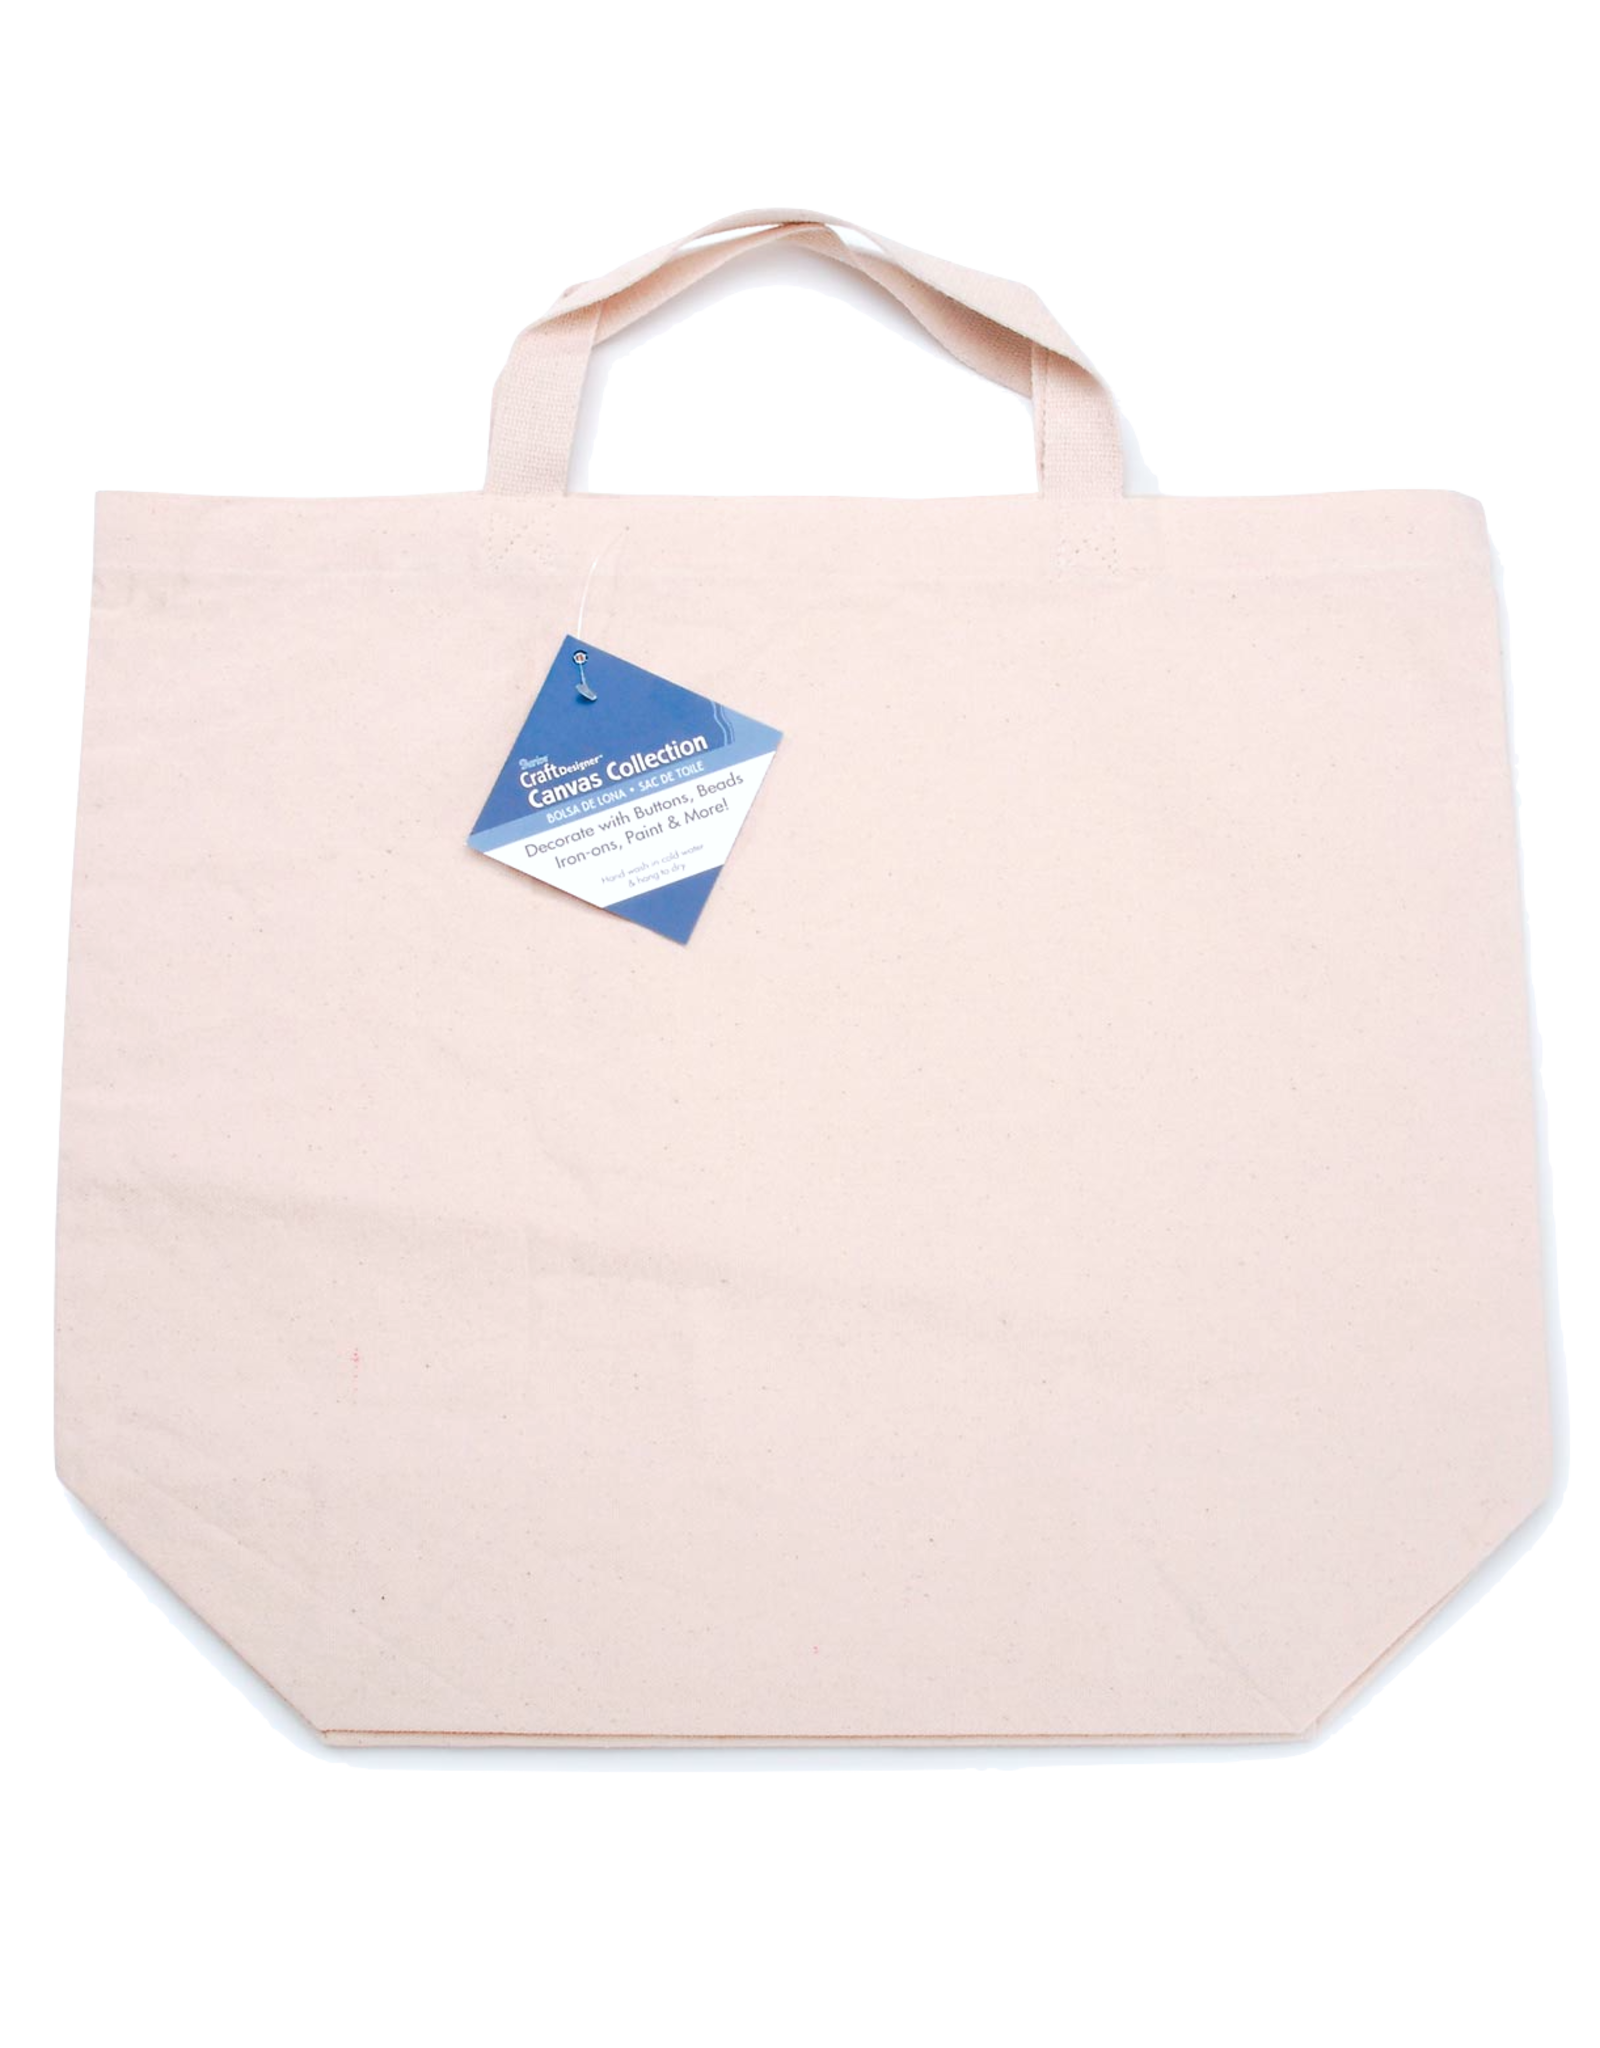 Darice Cotton Canvas Large Tote Bag 16X18x6 Inch Natural